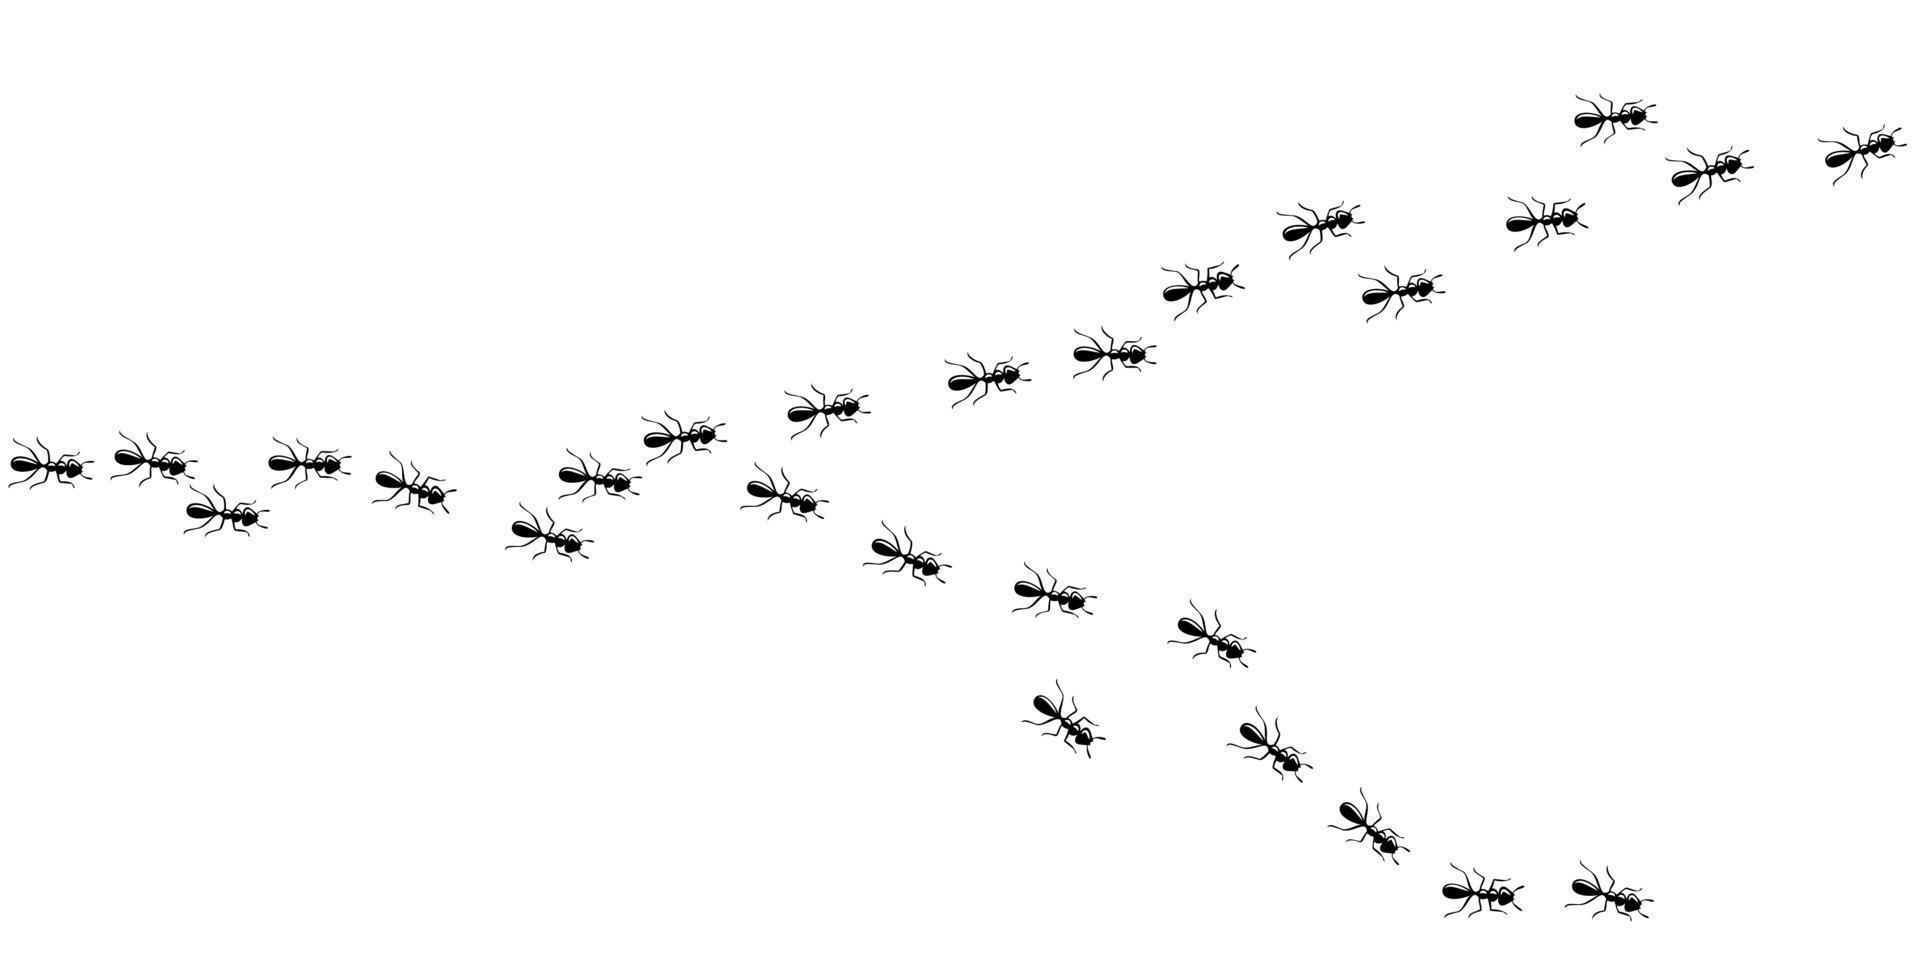 Ants marching in trail. Ants isolated in white background. Vector illustration